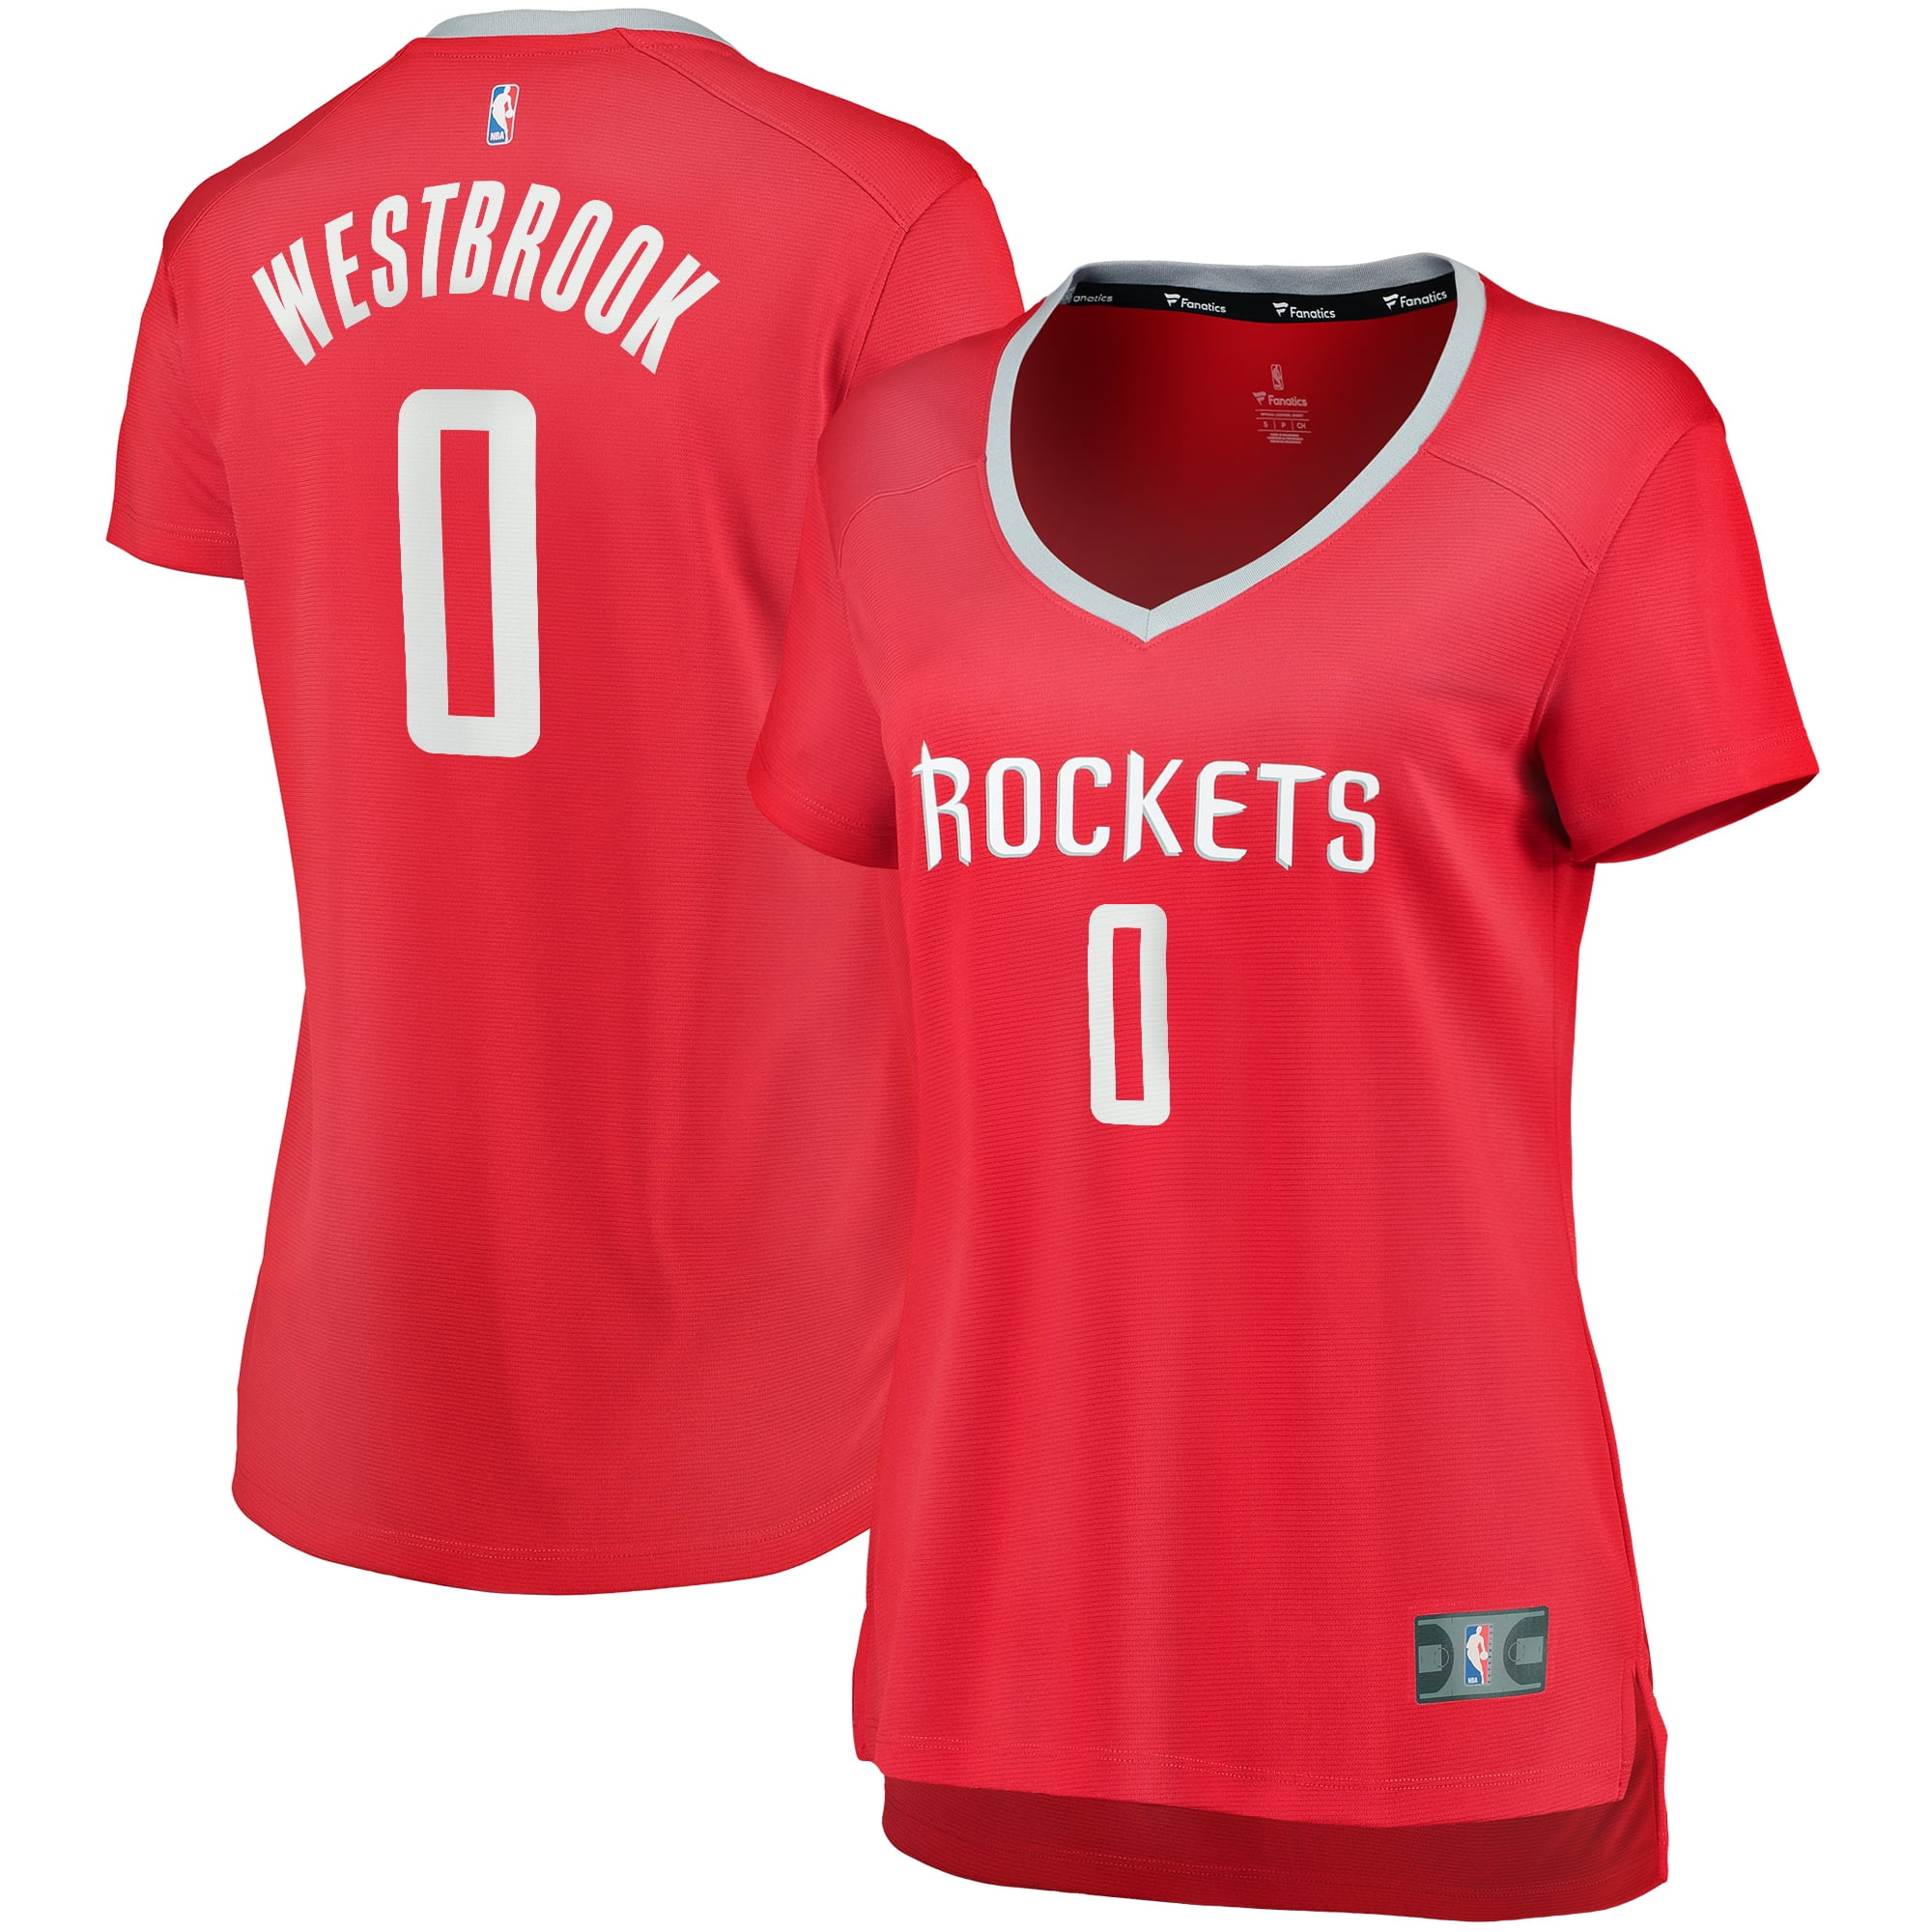 westbrook red jersey